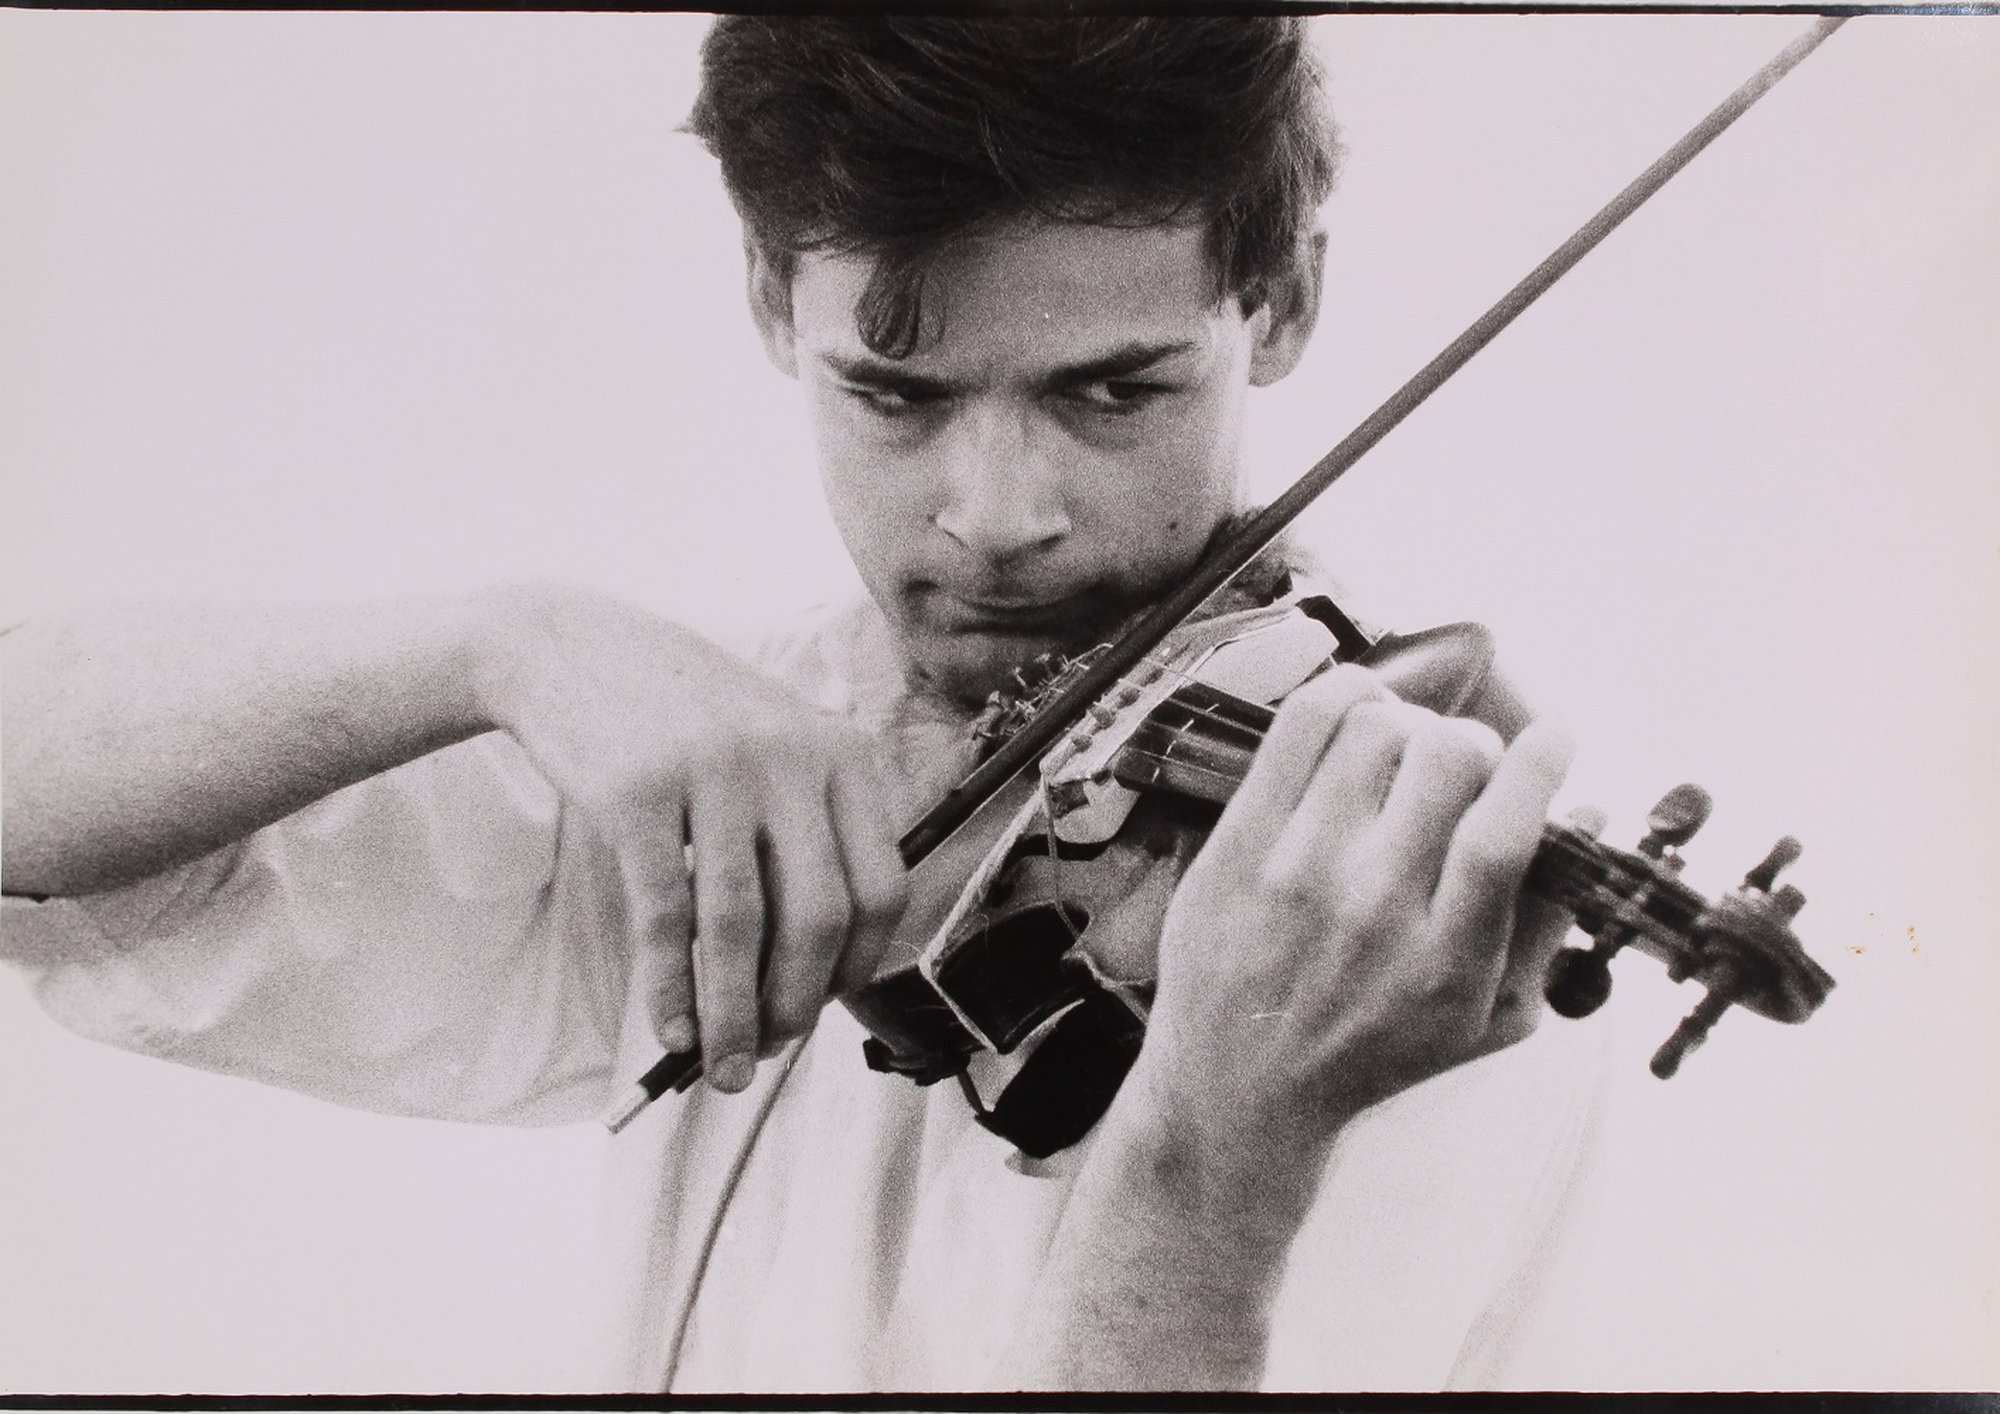 Tony Conrad played violin with the Theatre of Eternal Music in the early sixties, which utilised non-Western musical forms and sustained sound to produce what they called "dream music".